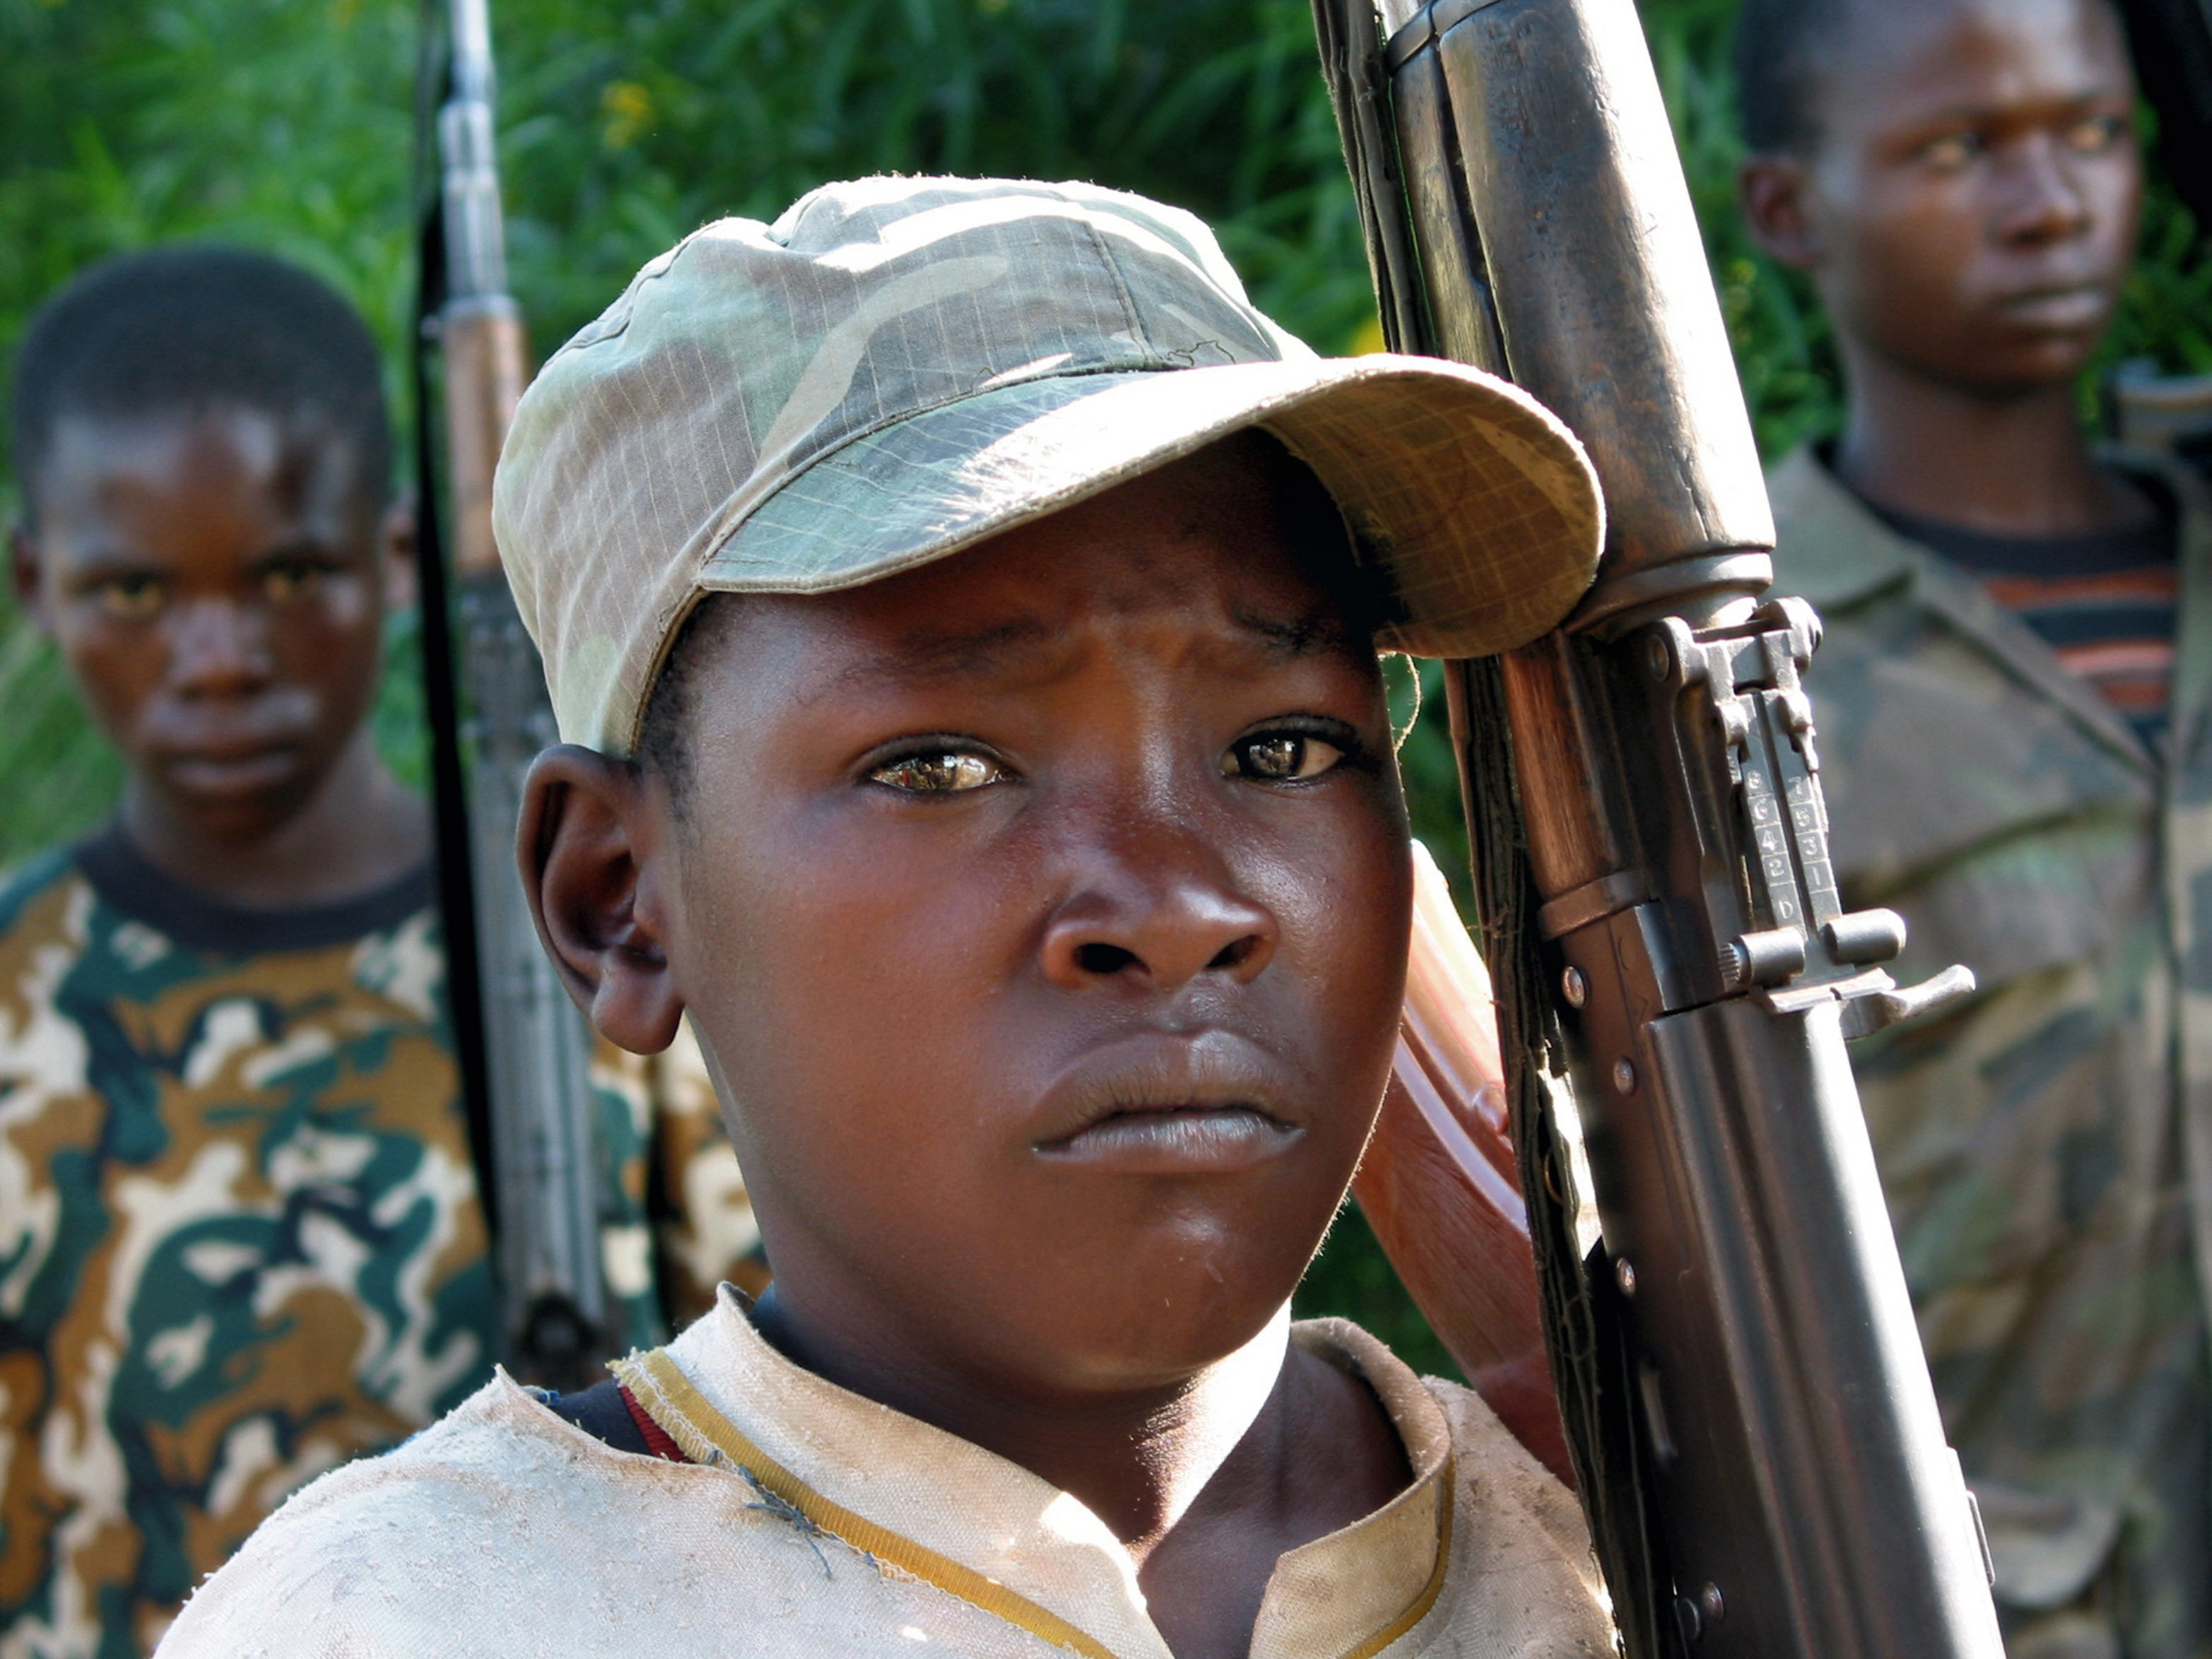 children and armed conflict in the democratic republic of the congo